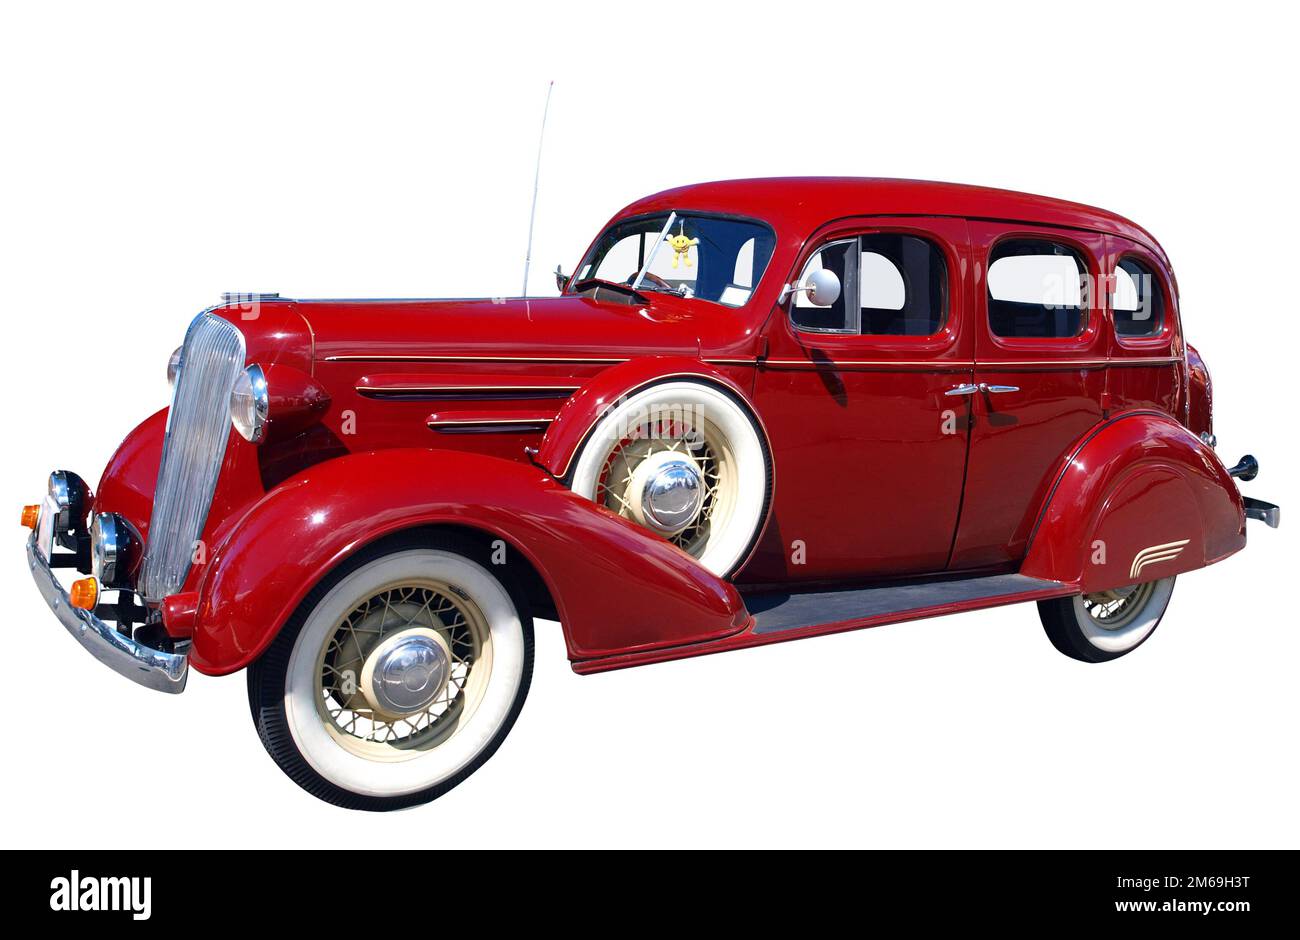 1936 Chevrolet Carryall Suburban - Free high resolution car images